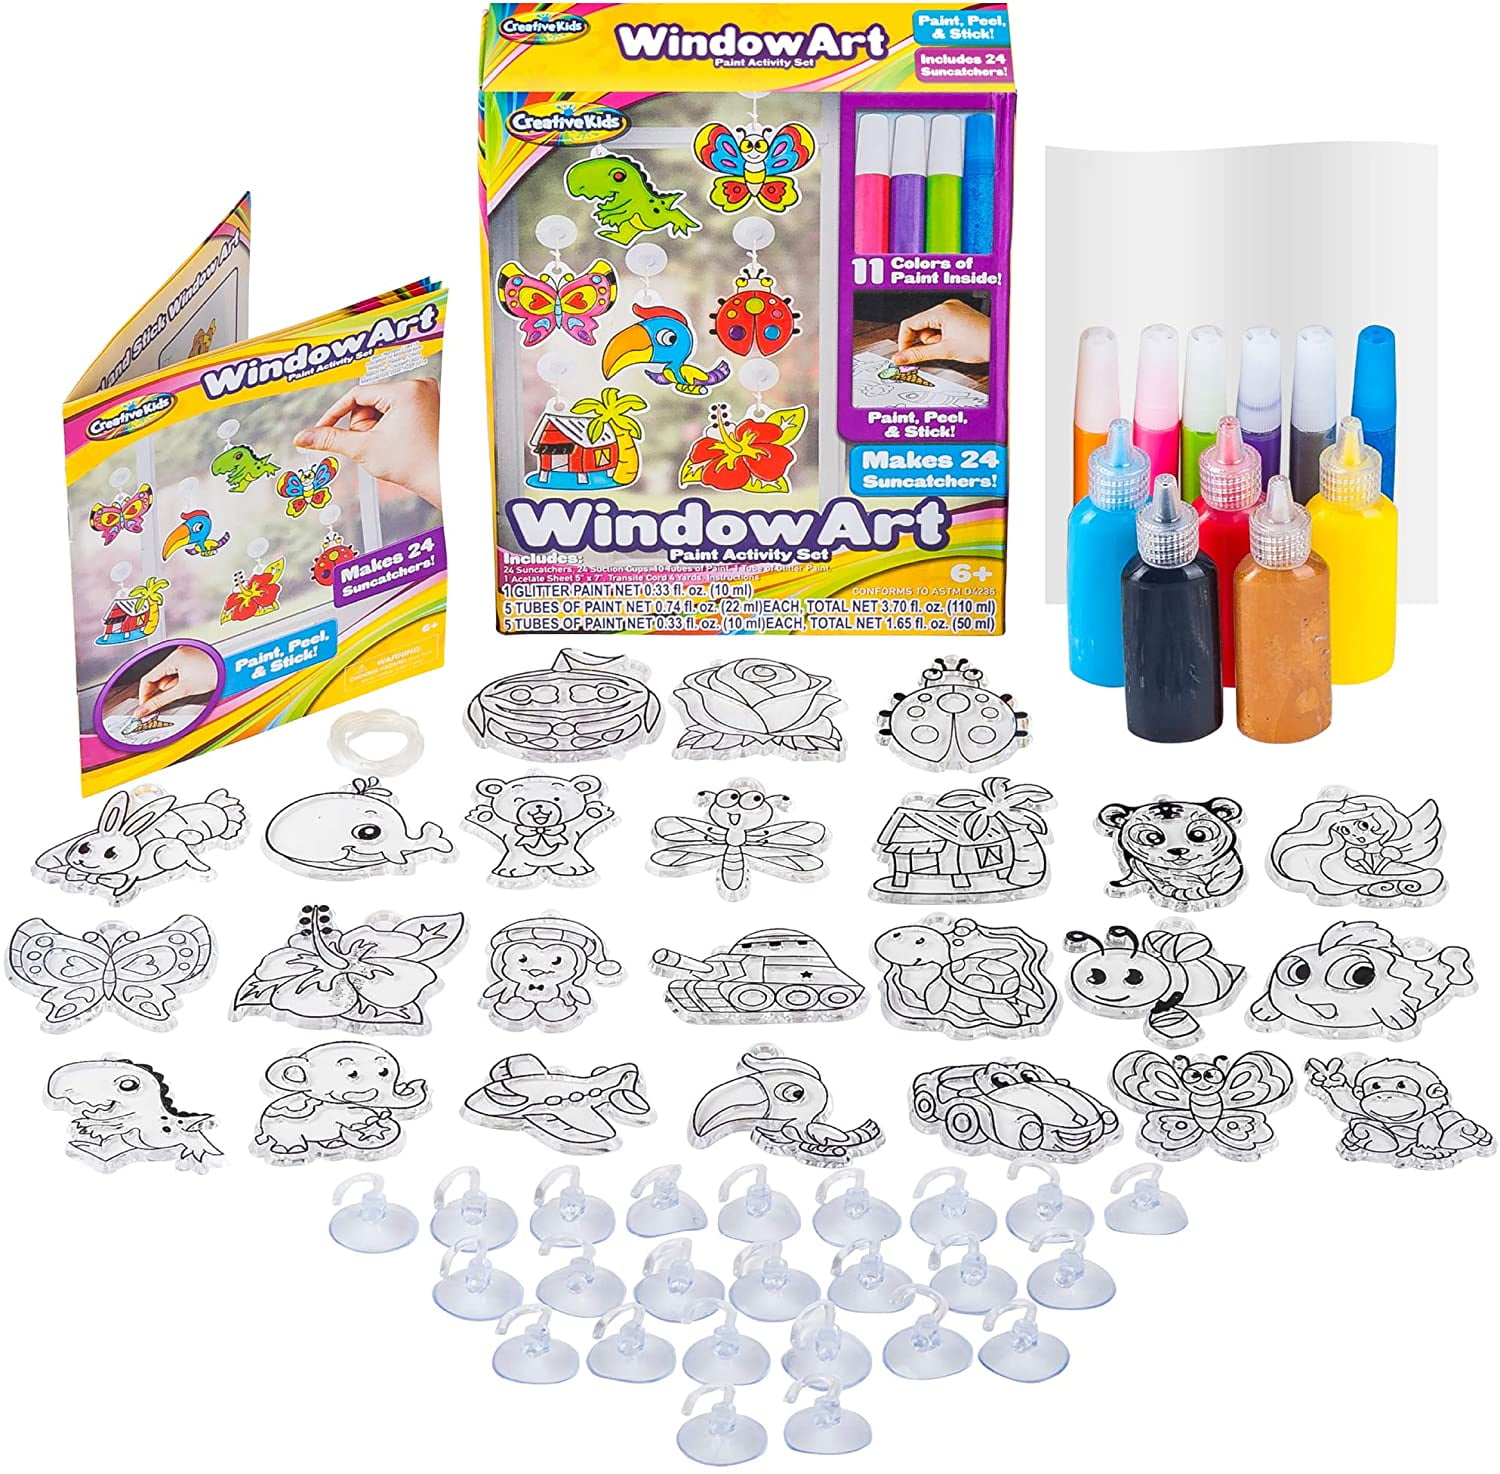 AVIASWIN aviaswin girls toys age 4-6-8 window art for kids, suncatchers  painting kit, arts and crafts for kids ages 5 6 7 8 9 10, diy